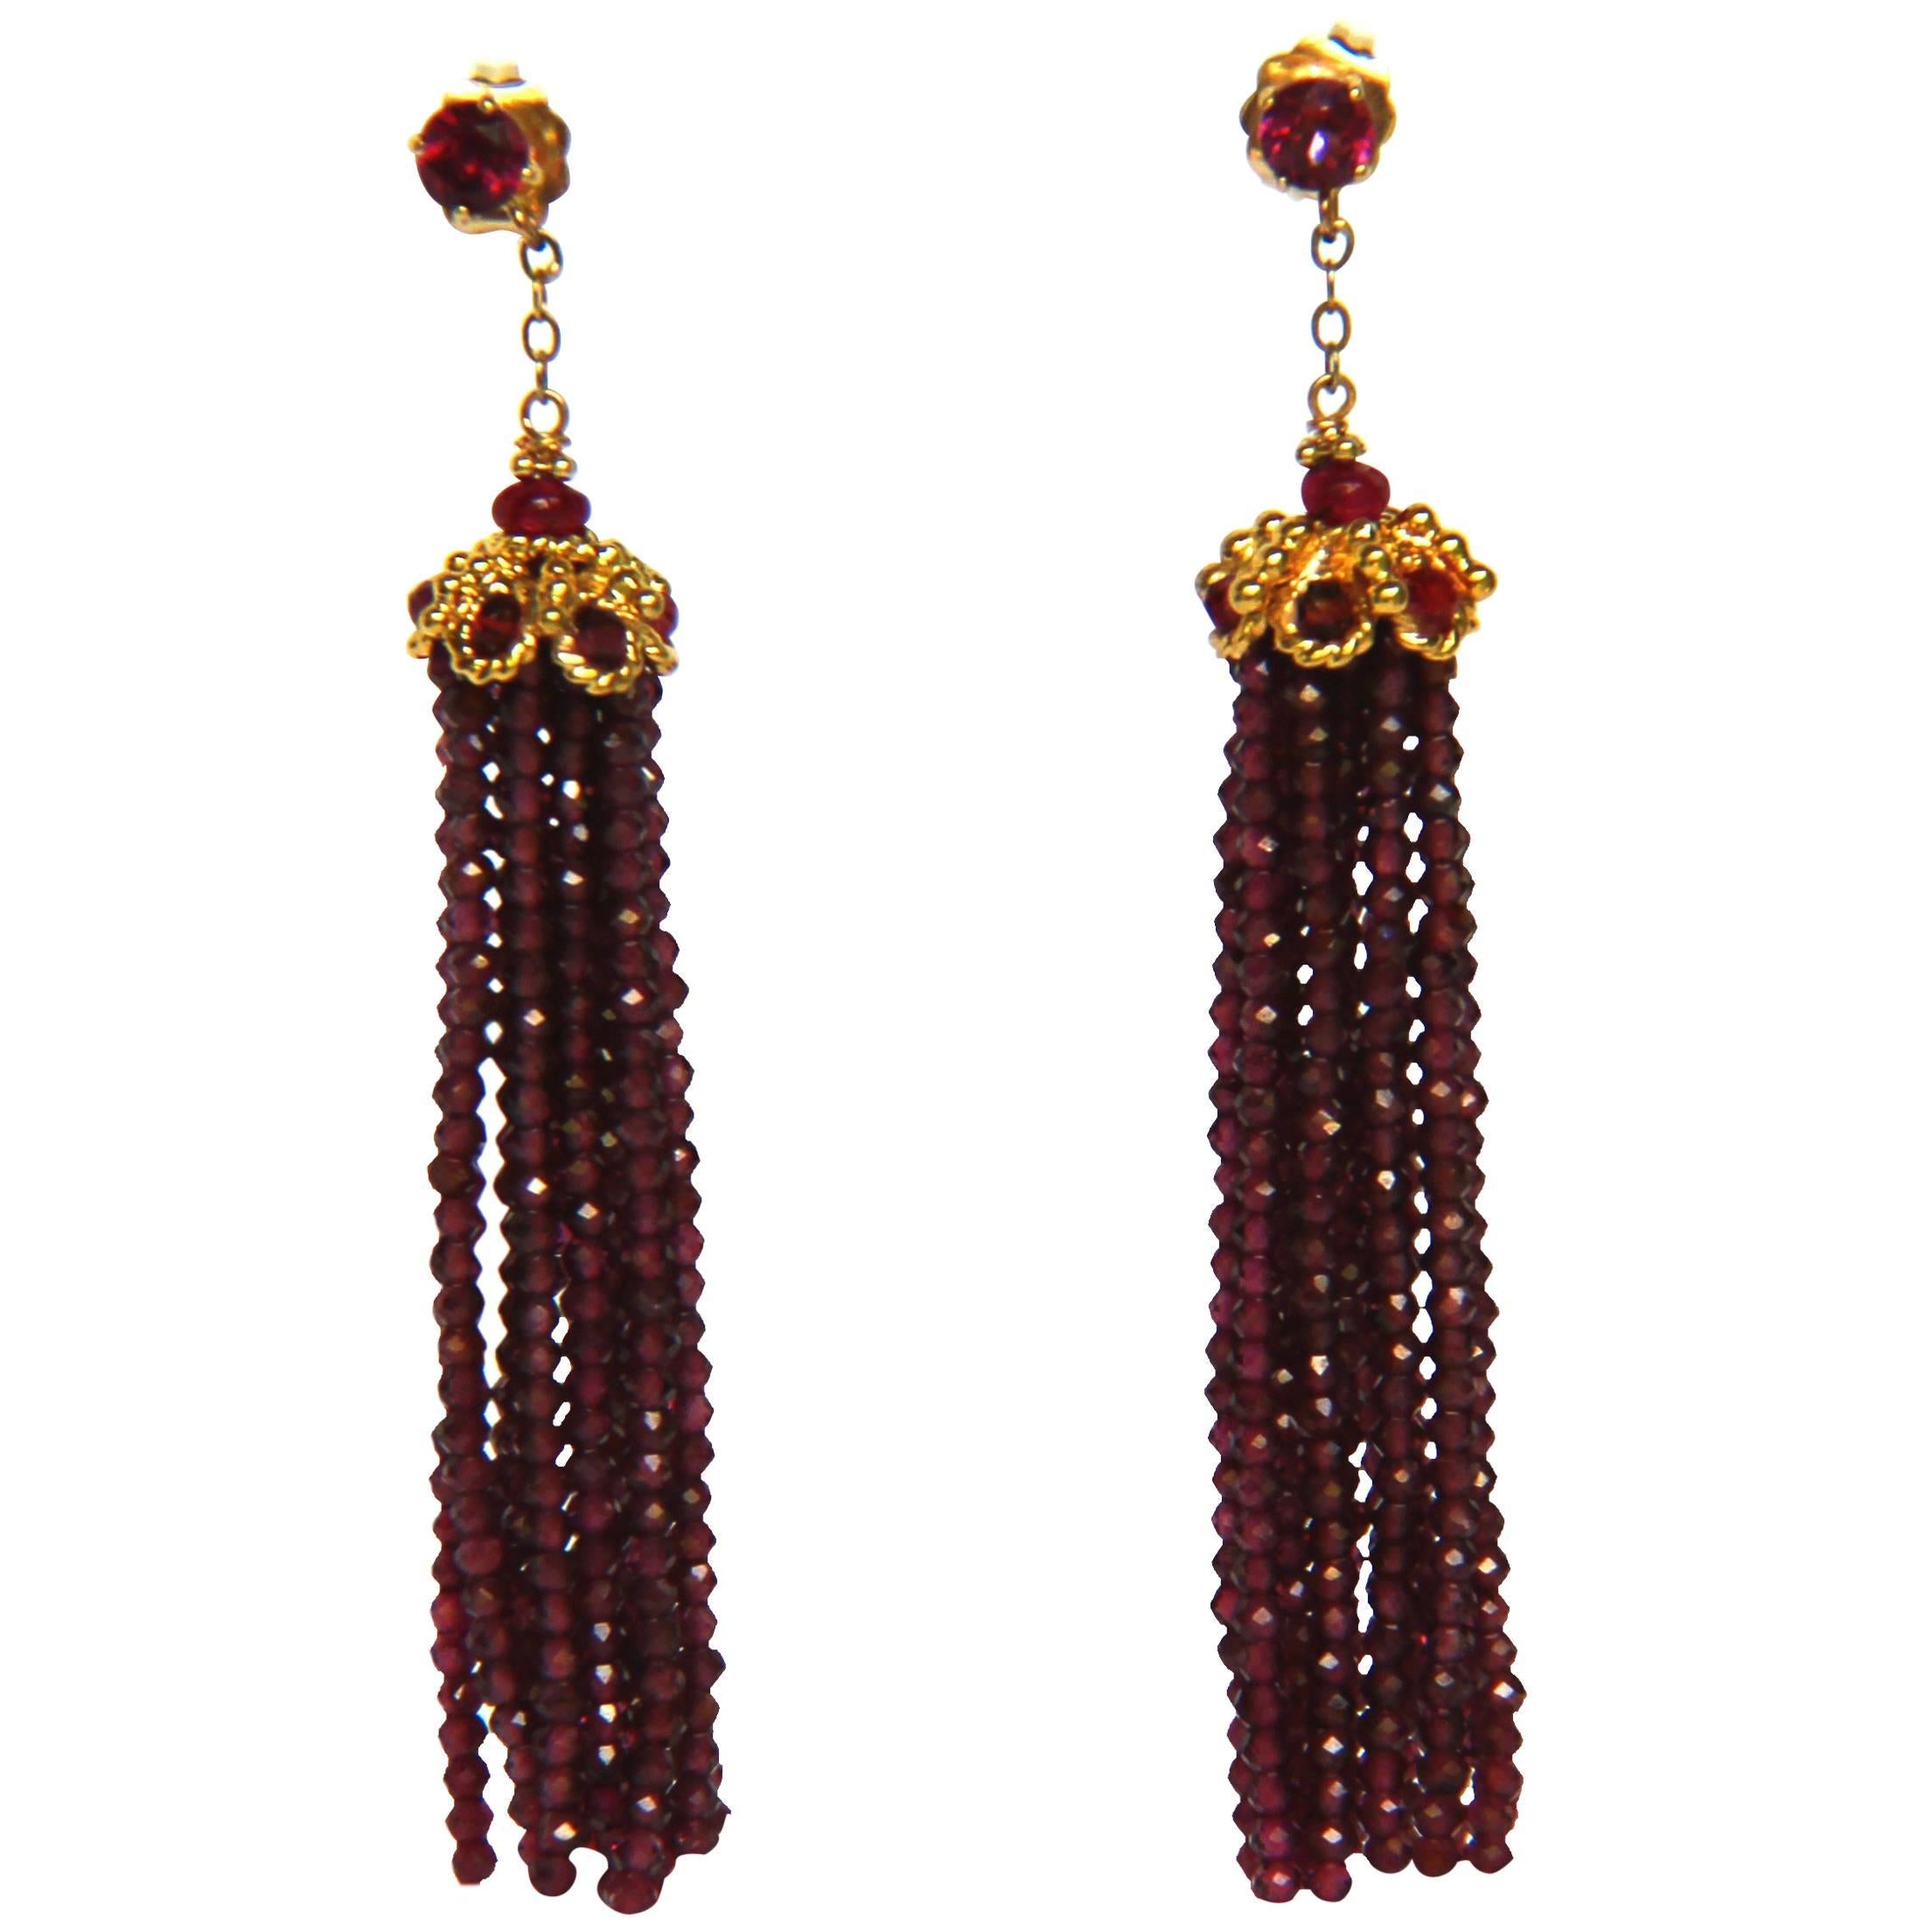 These unique earrings are composed with the finest 1 mm faceted amethyst beaded tassels with 14k yellow gold cup and stud to complete the look. The tassels flow out of a 14 K yellow gold cup, with amethyst and ruby beads connected to a fine 14 k